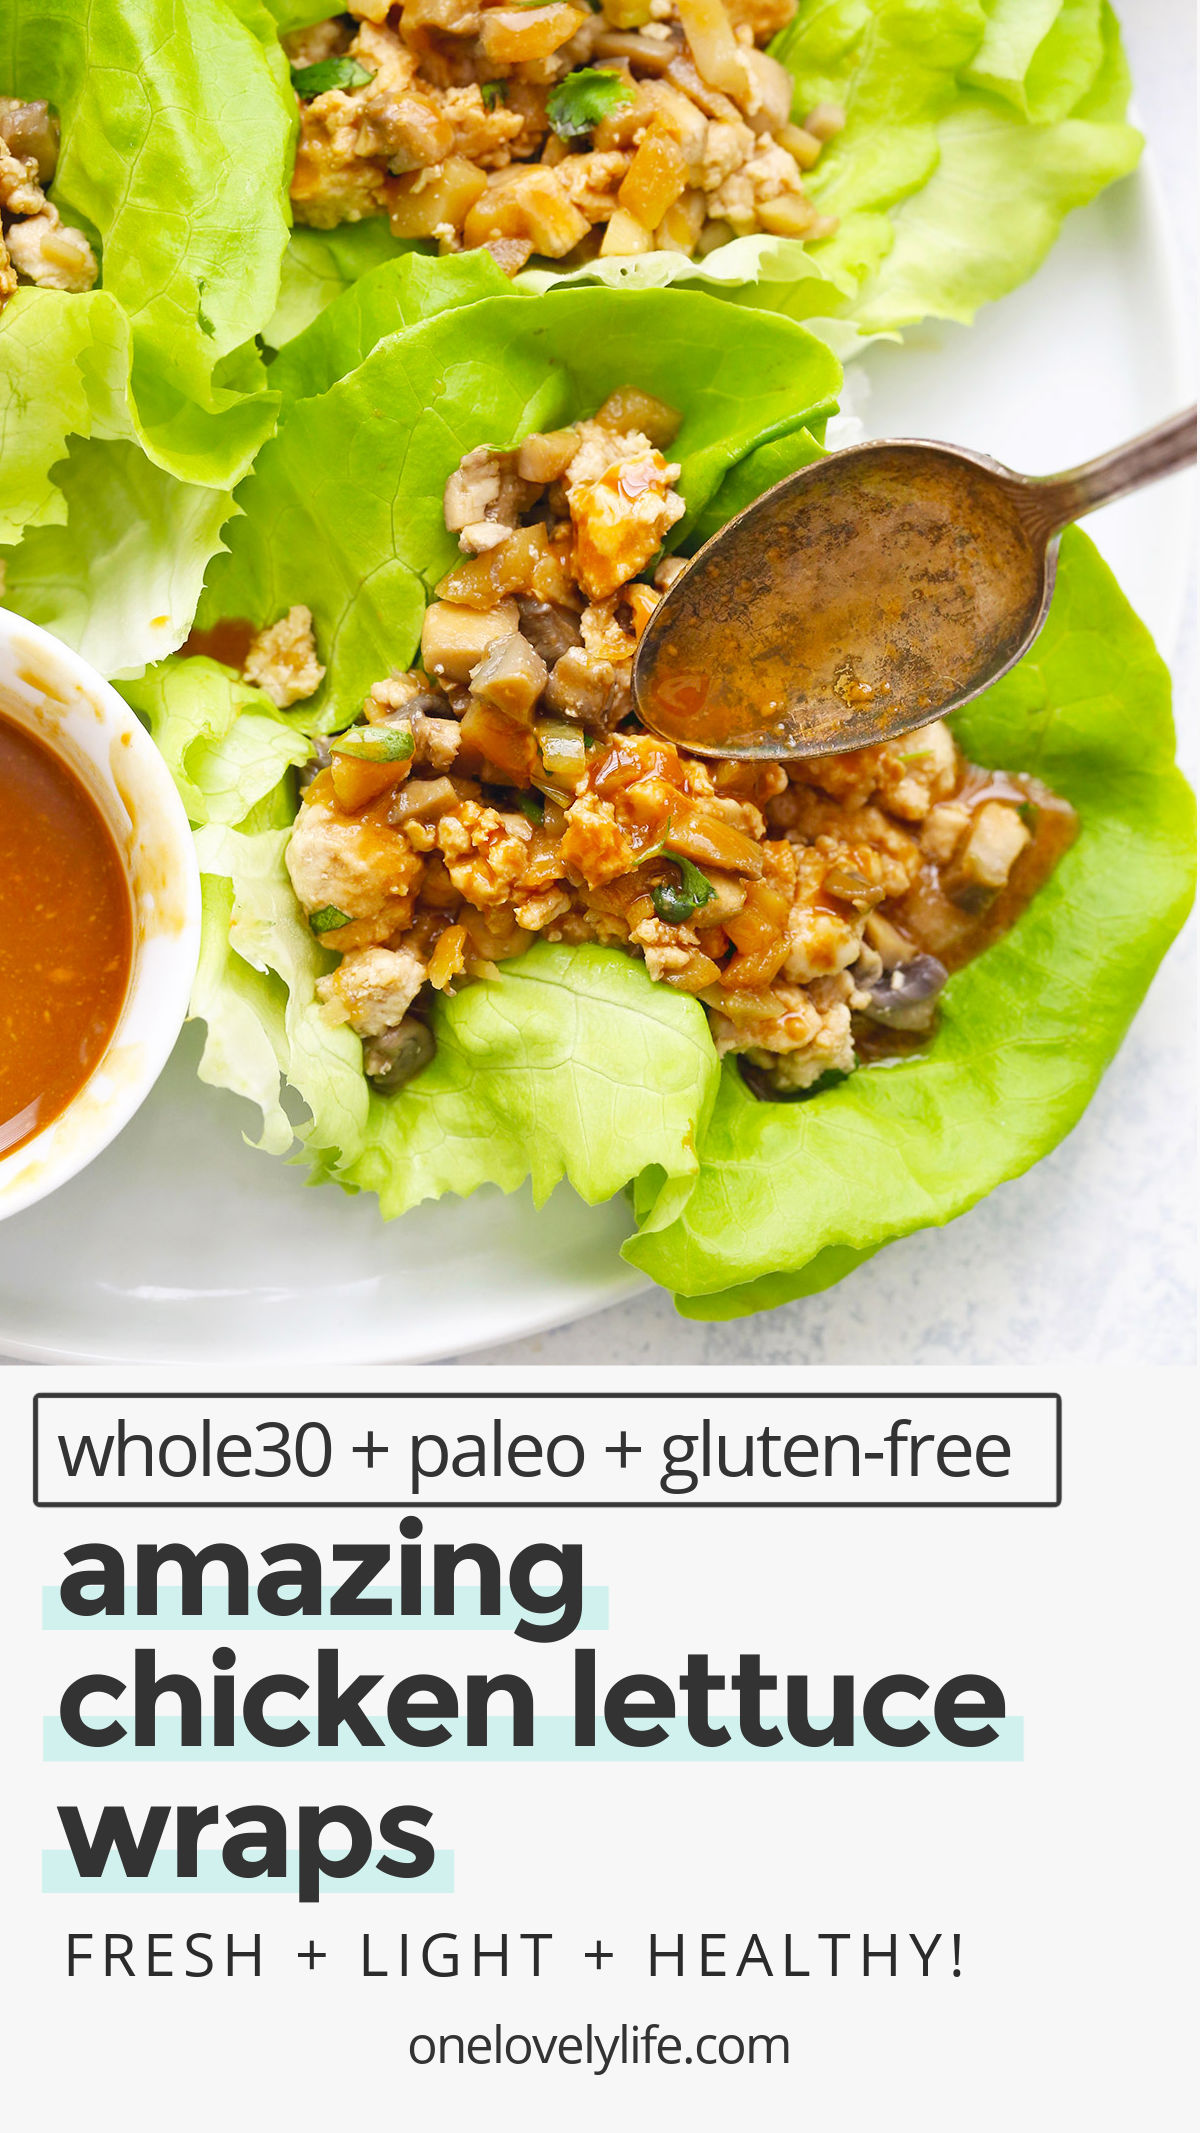 Paleo Chicken Lettuce Wraps - Fresh, flavorful & FAST, these healthy chicken lettuce wraps are on the table in no time. (Gluten-Free, Whole30) // Whole30 lettuce wraps // chicken lettuce wraps recipe // healthy chicken lettuce wraps // healthy lettuce wraps // paleo lettuce wraps // PF changs lettuce wraps //